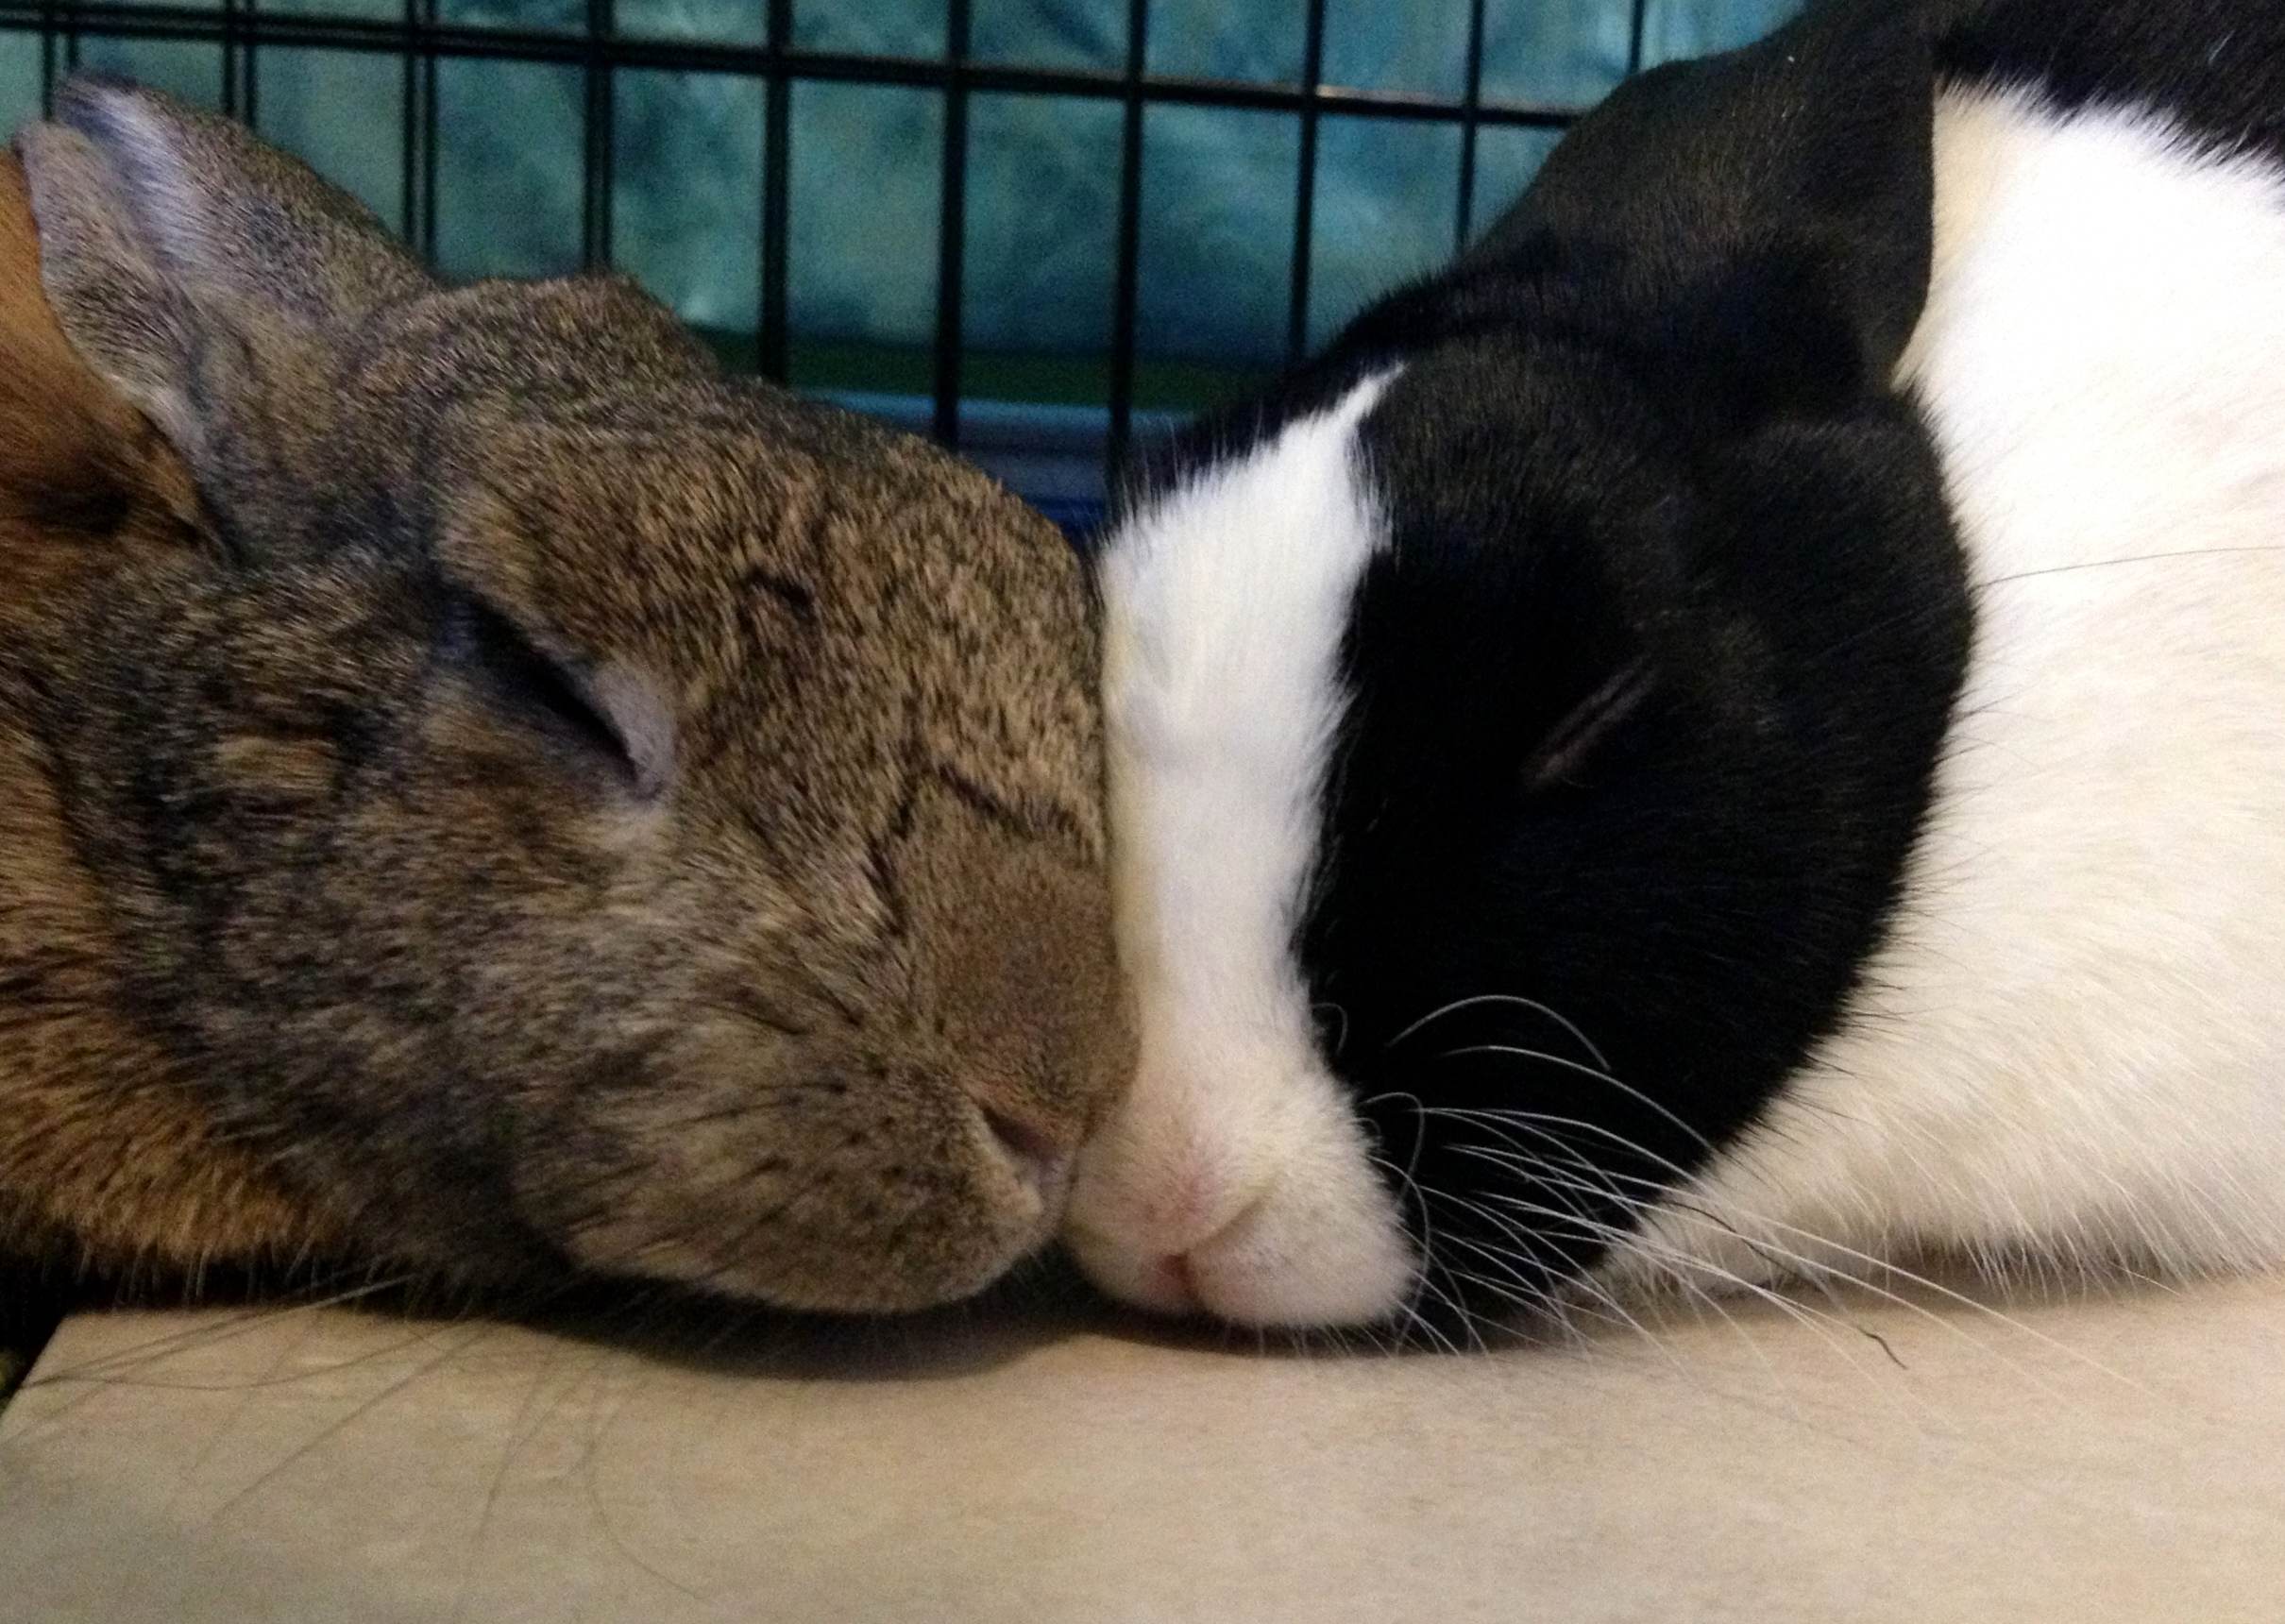 Bunnies Have a Sweet Snuggle